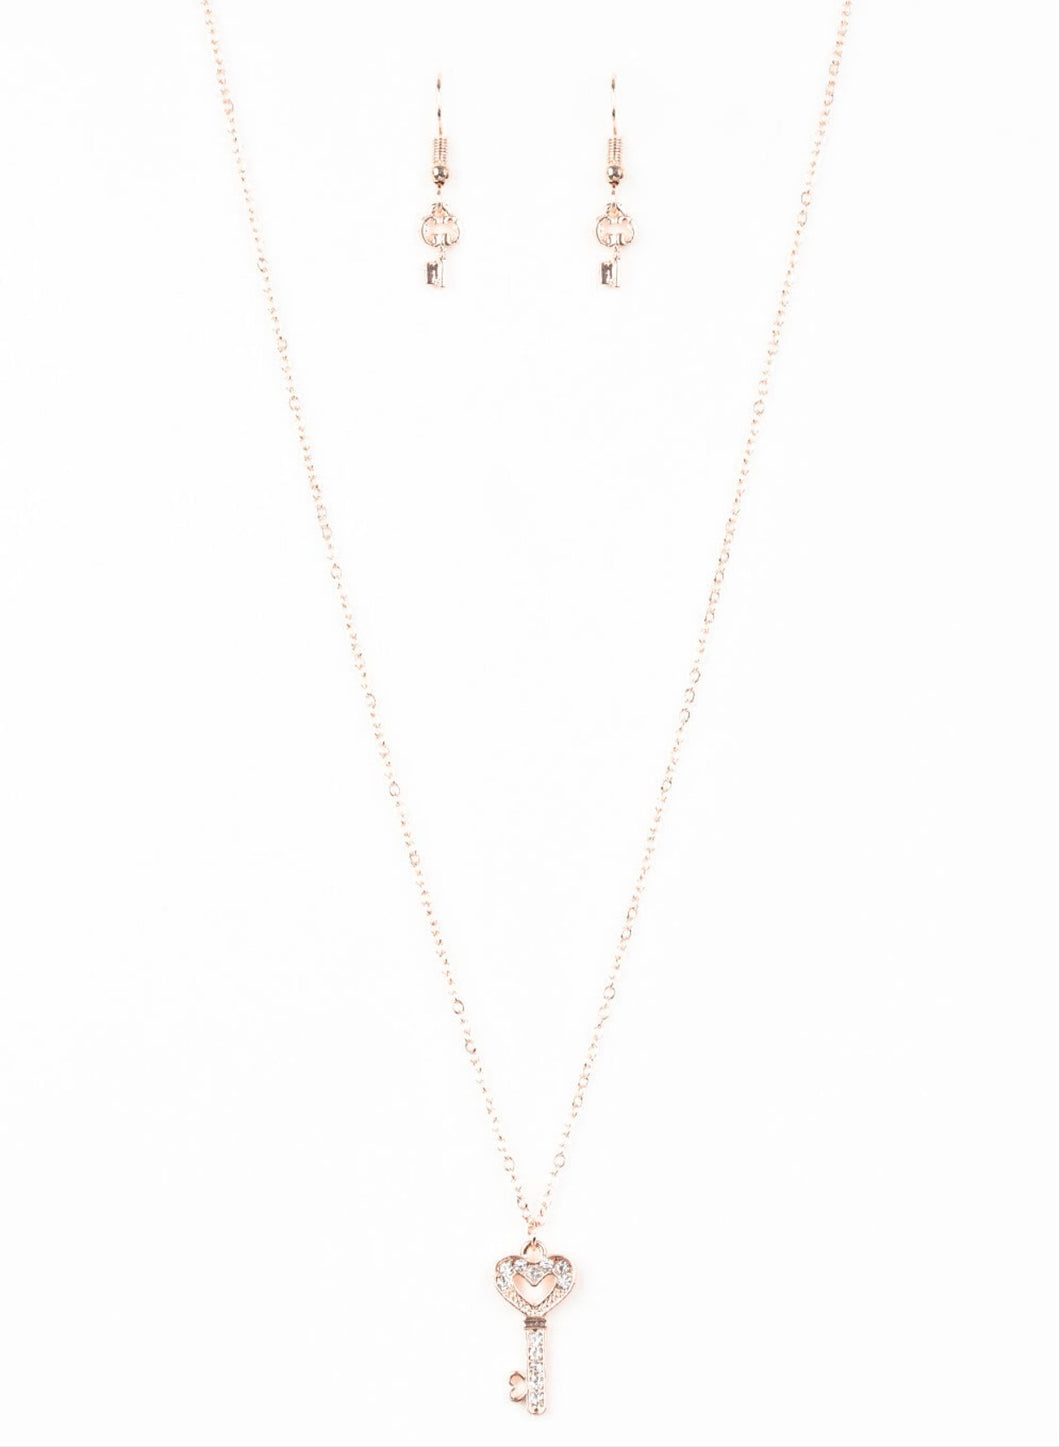 Lock Up Your Valuables Rose Gold and Bling Necklace and Earrings